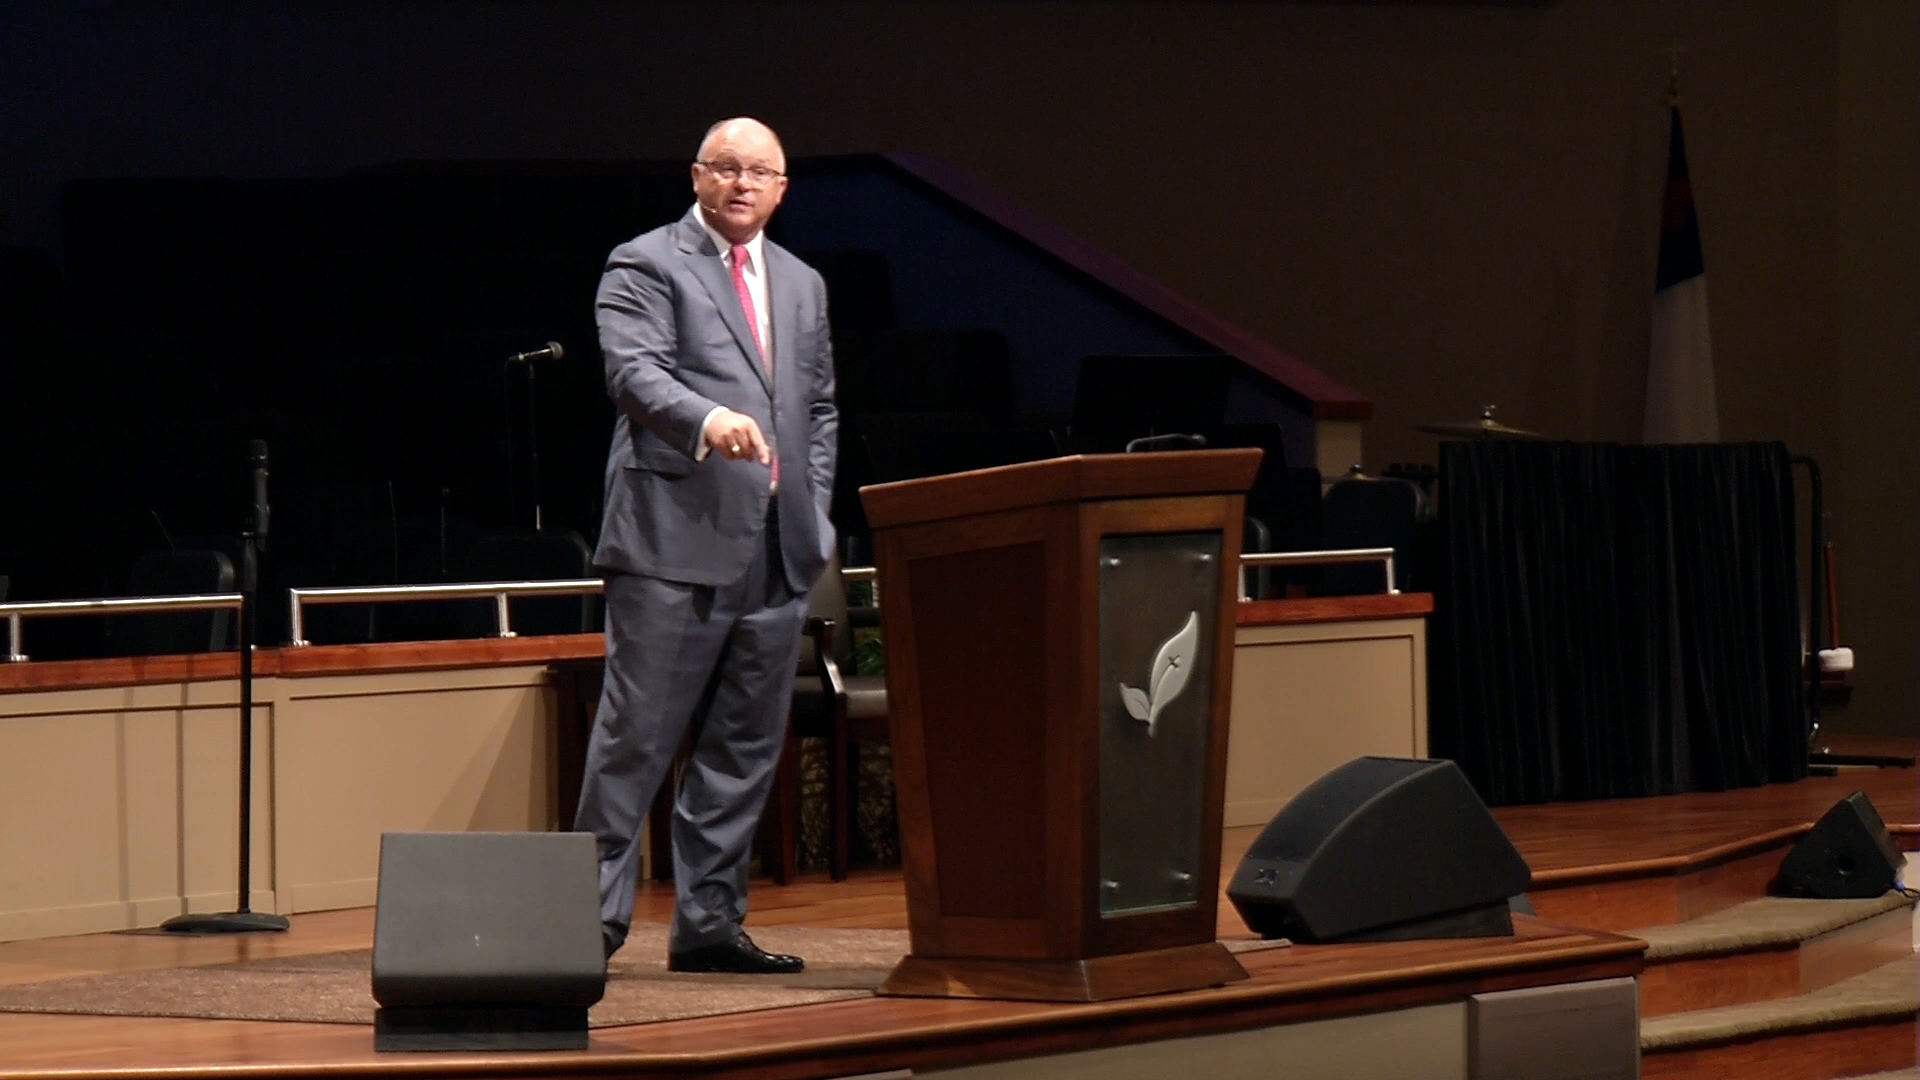 Pastor Paul Chappell: Strengthened in Discernment